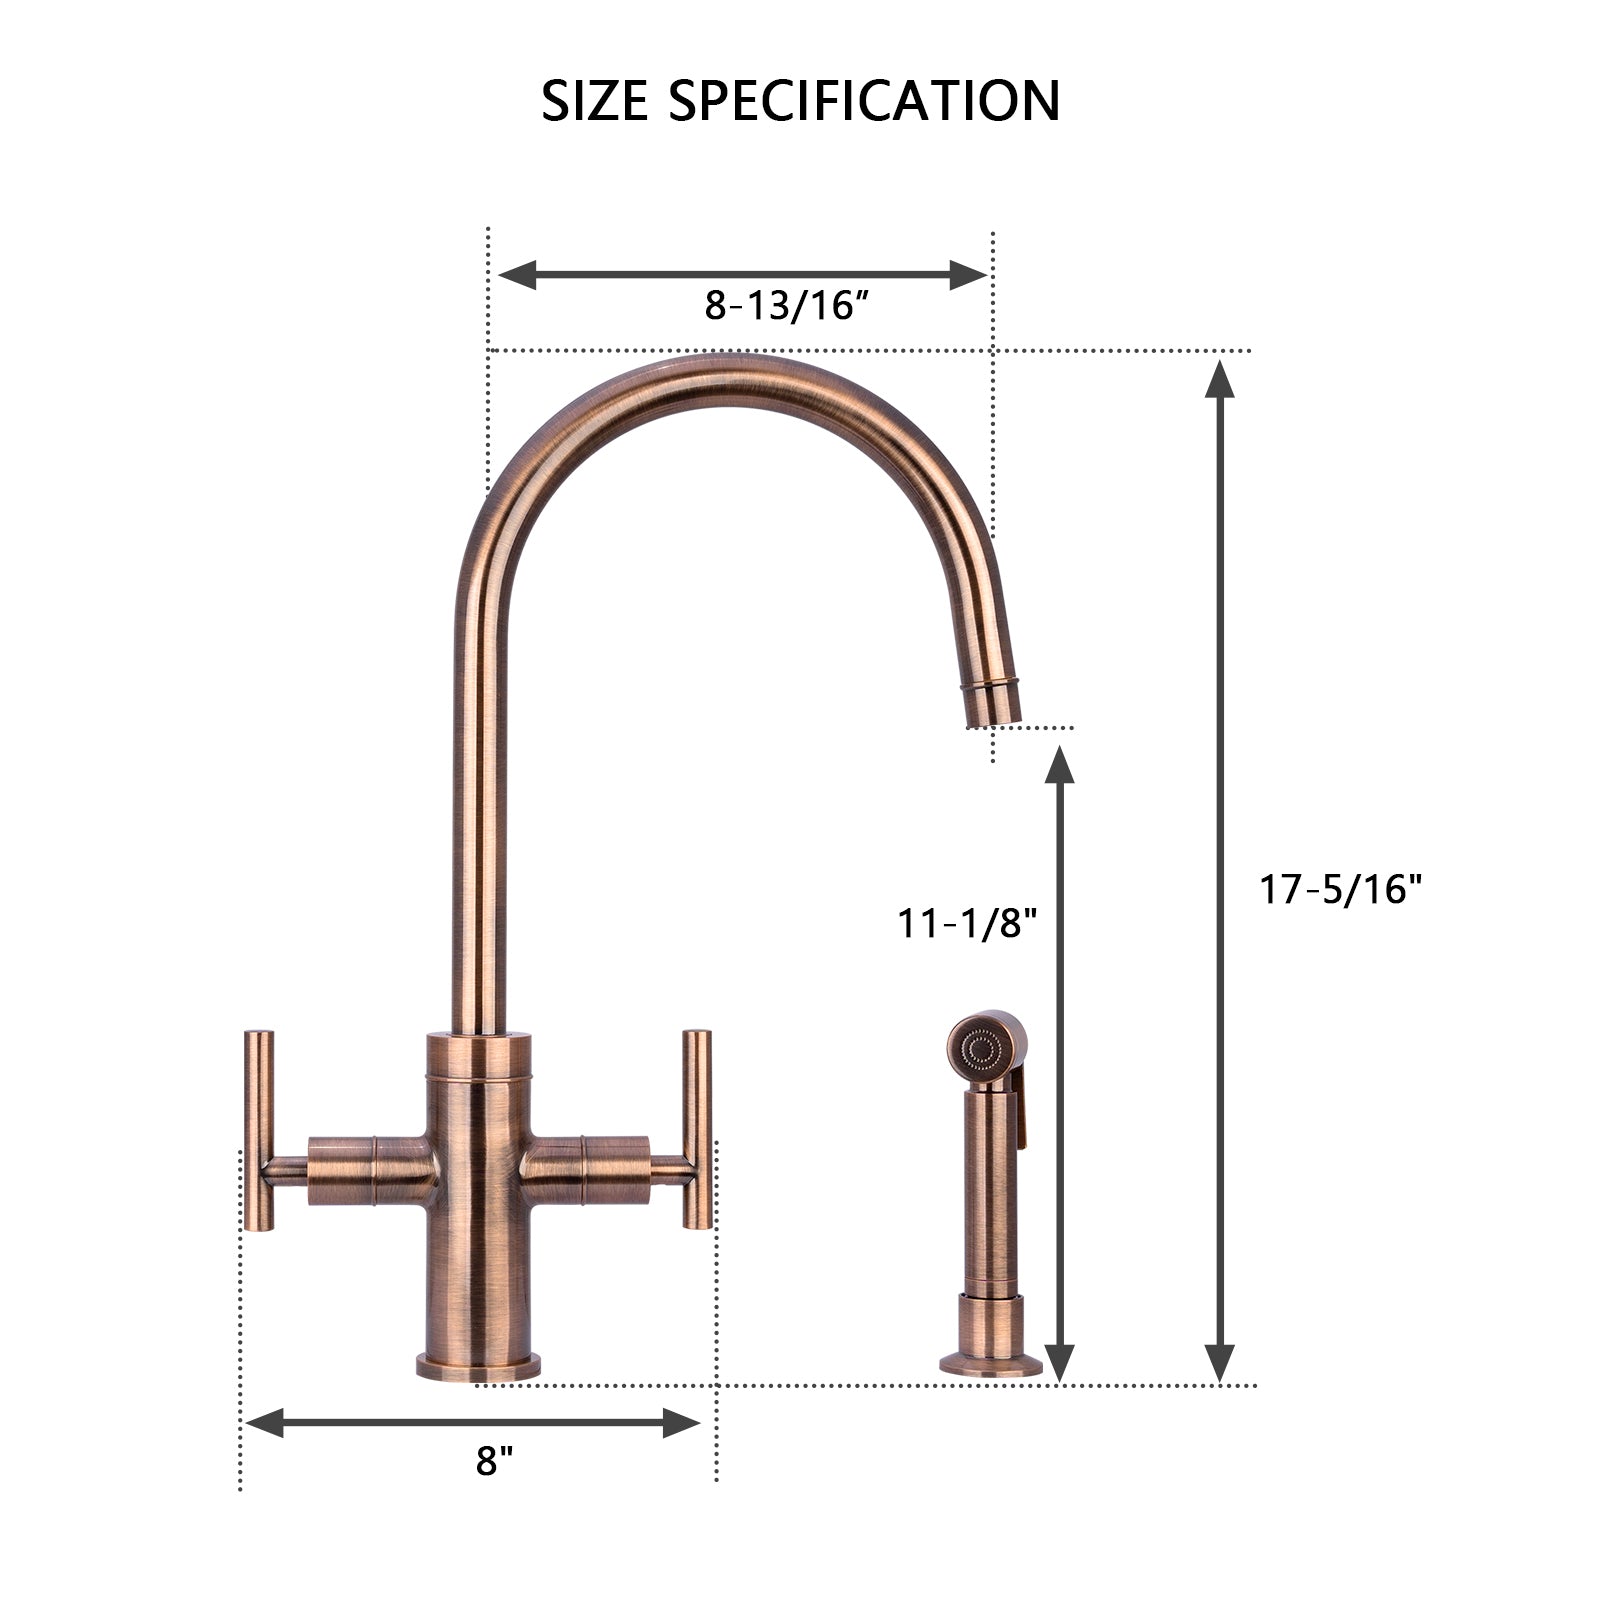 Two-Handle Antique Copper Widespread Kitchen Faucet with Side Sprayer-AK96766-AC